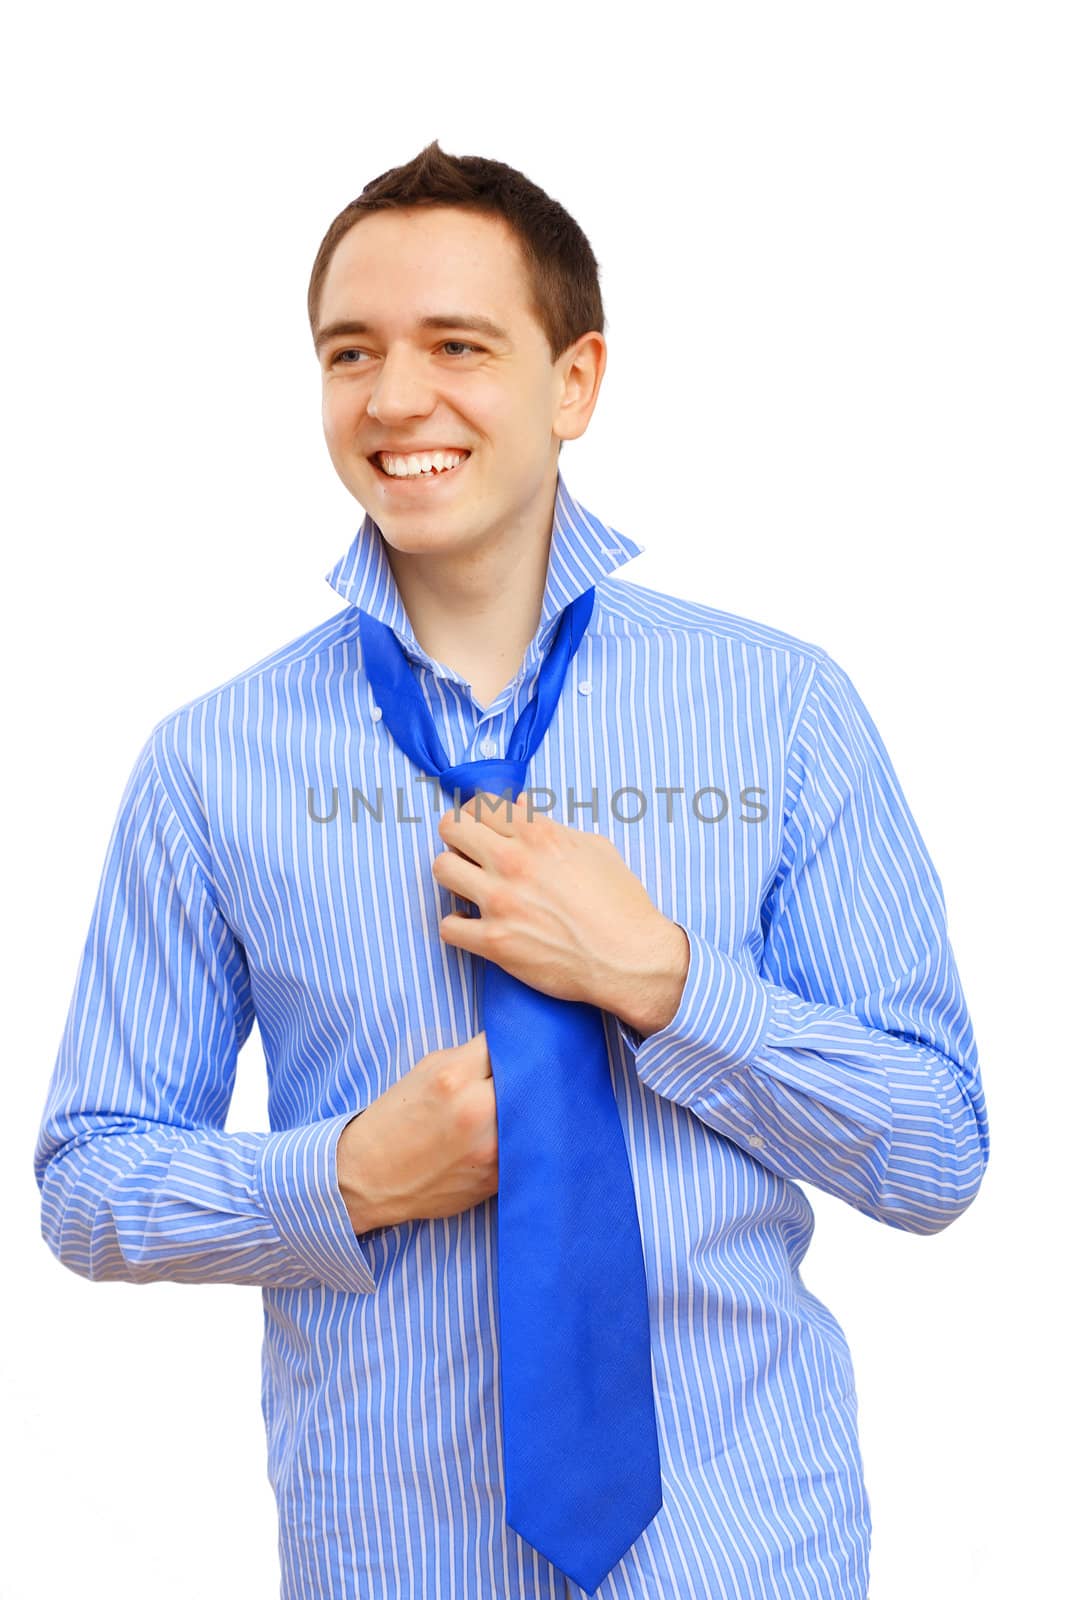 Attractive young business man binding his blue tie